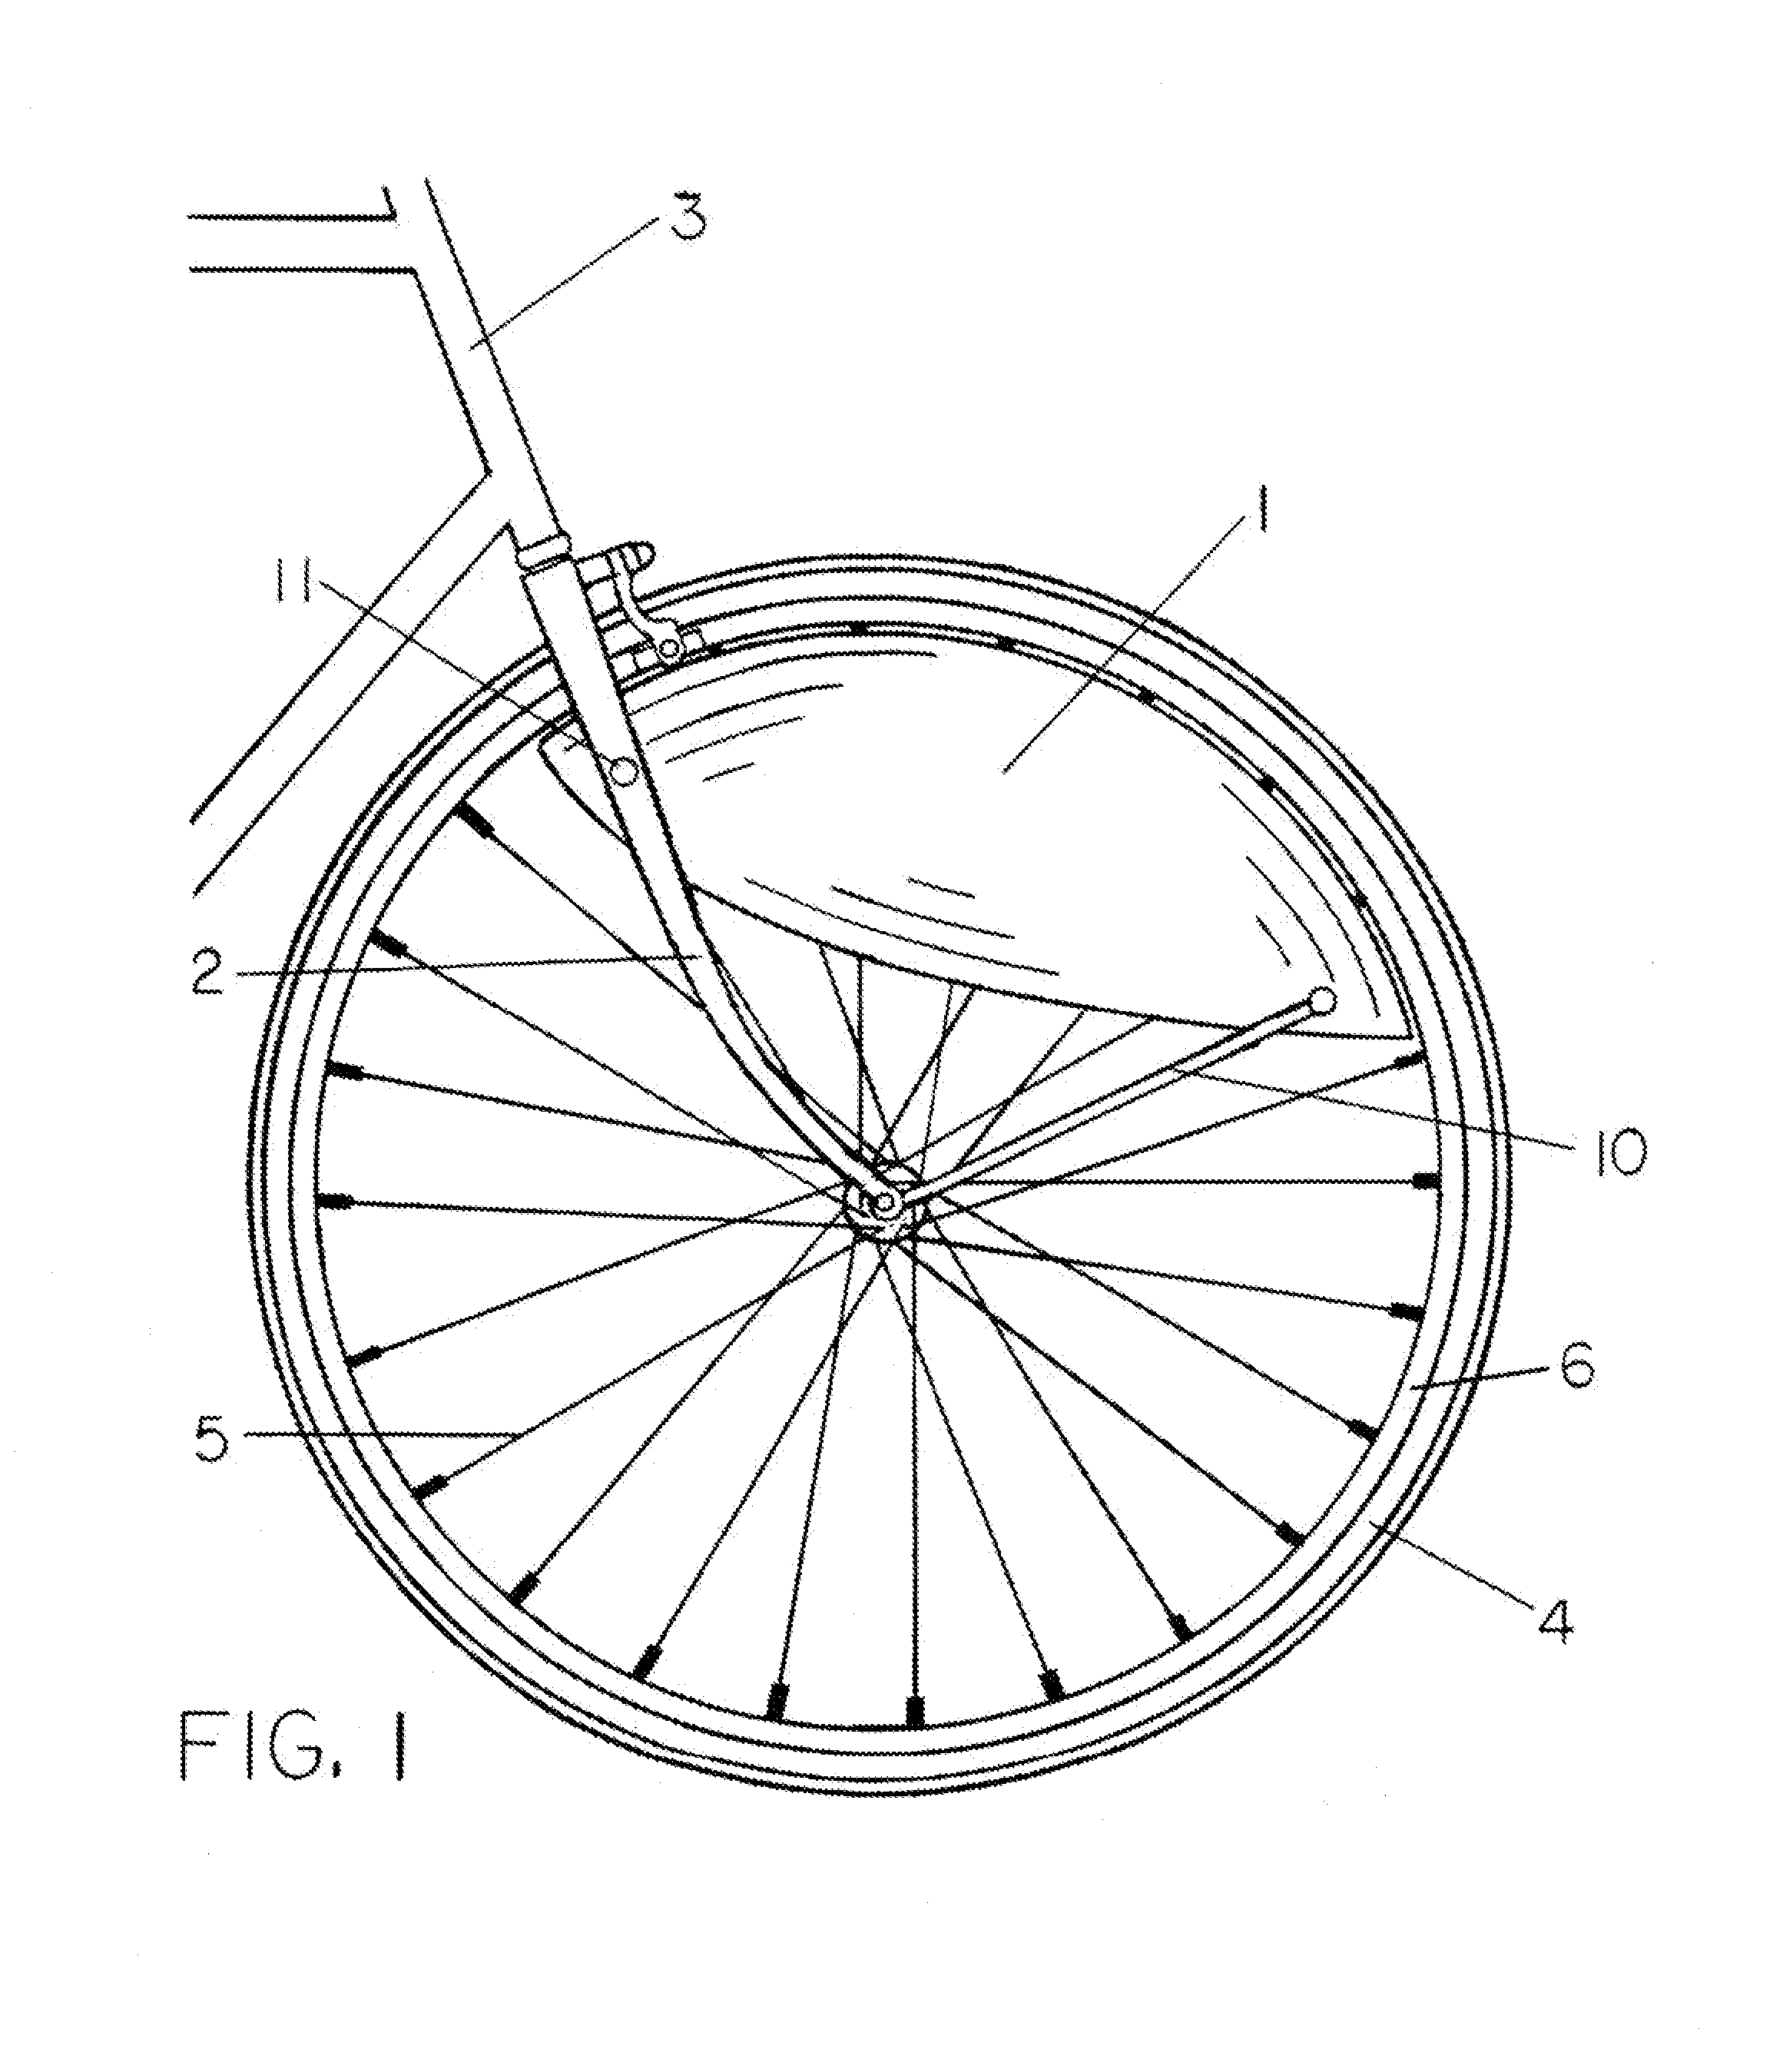 METHOD and APPARATUS for MINIMIZING DRAG-INDUCED FORCES on a WHEELED VEHICLE